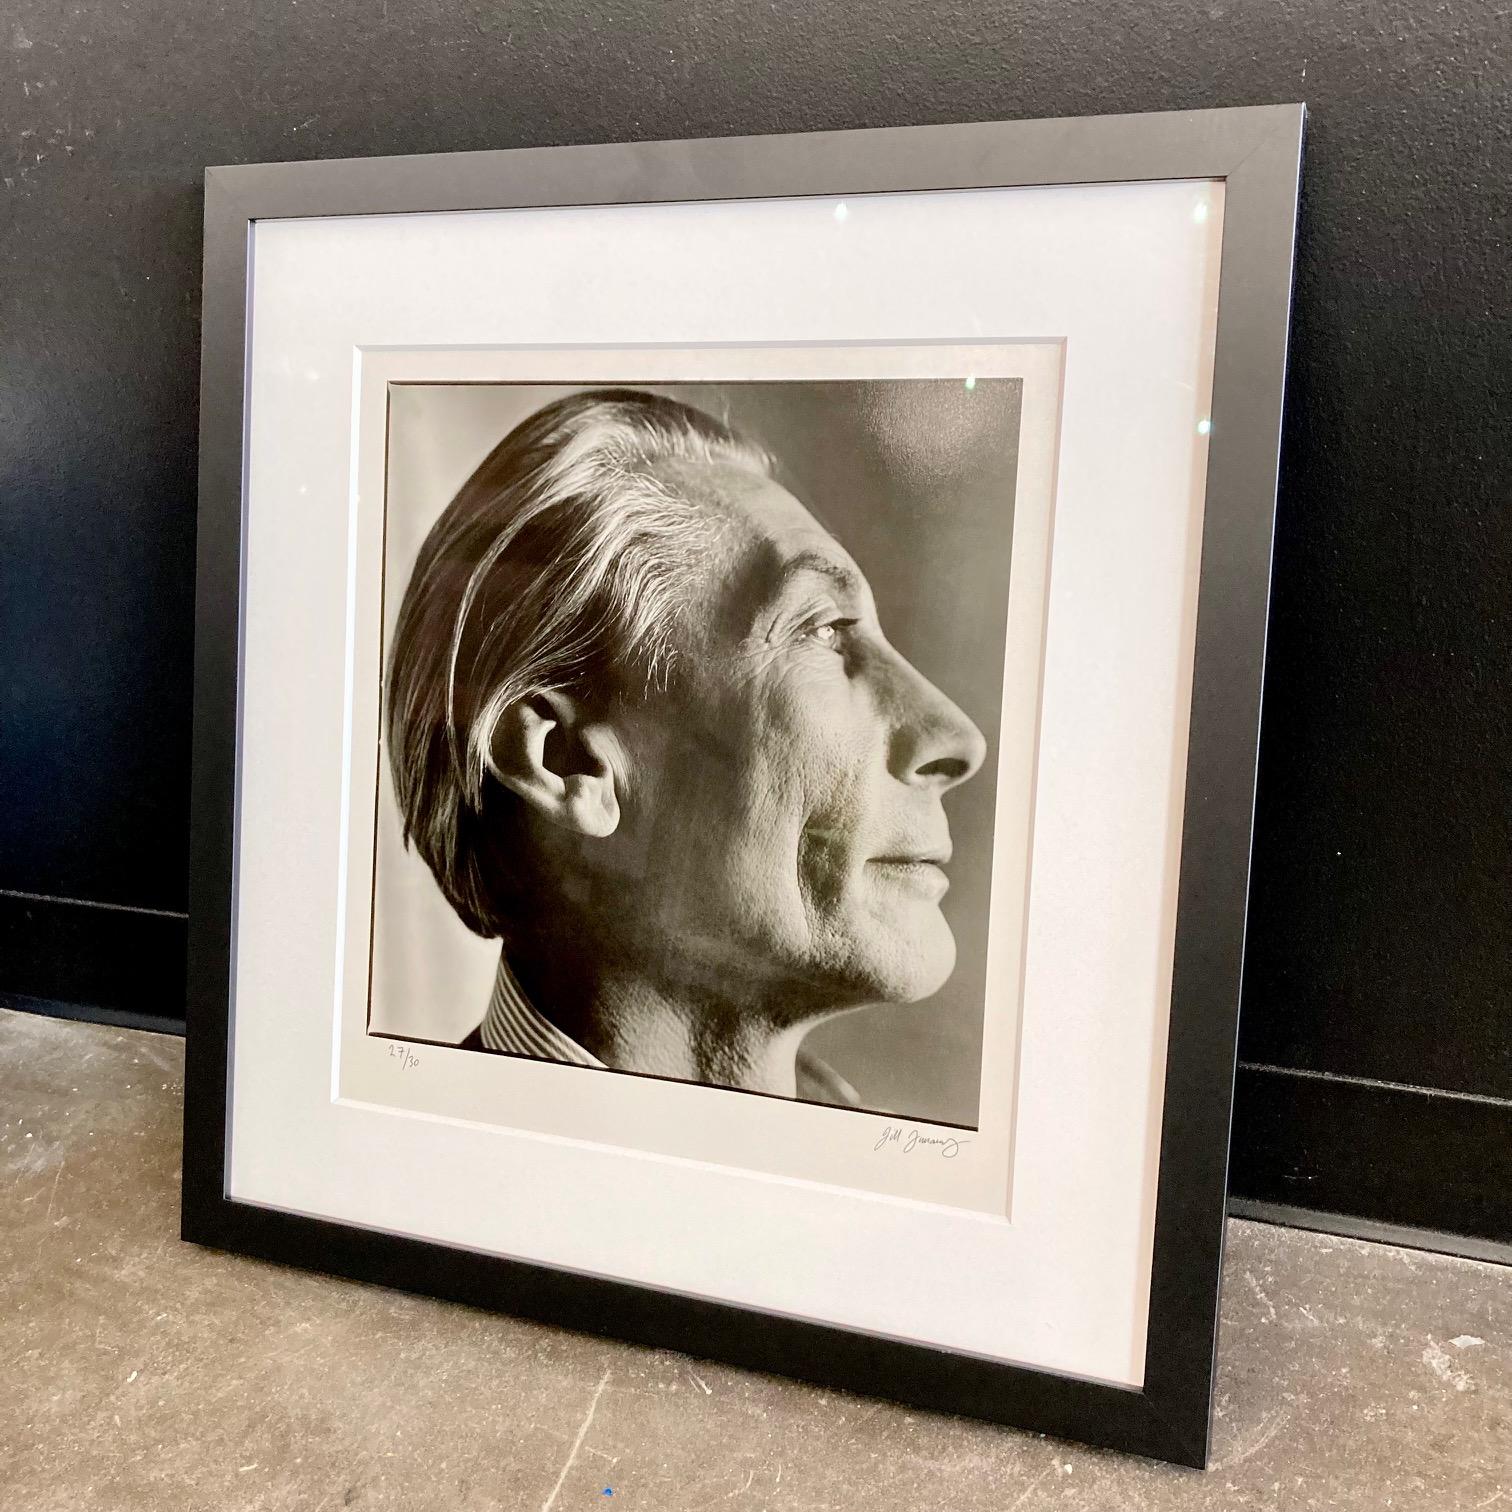 Signed limited edition print of Charlie Watts, drummer of the Rolling Stones, taken by acclaimed photographer, Jill Furmanovsky in 1991 at The Halcyon Hotel, London England.

This is one of the last prints available, limited edition number